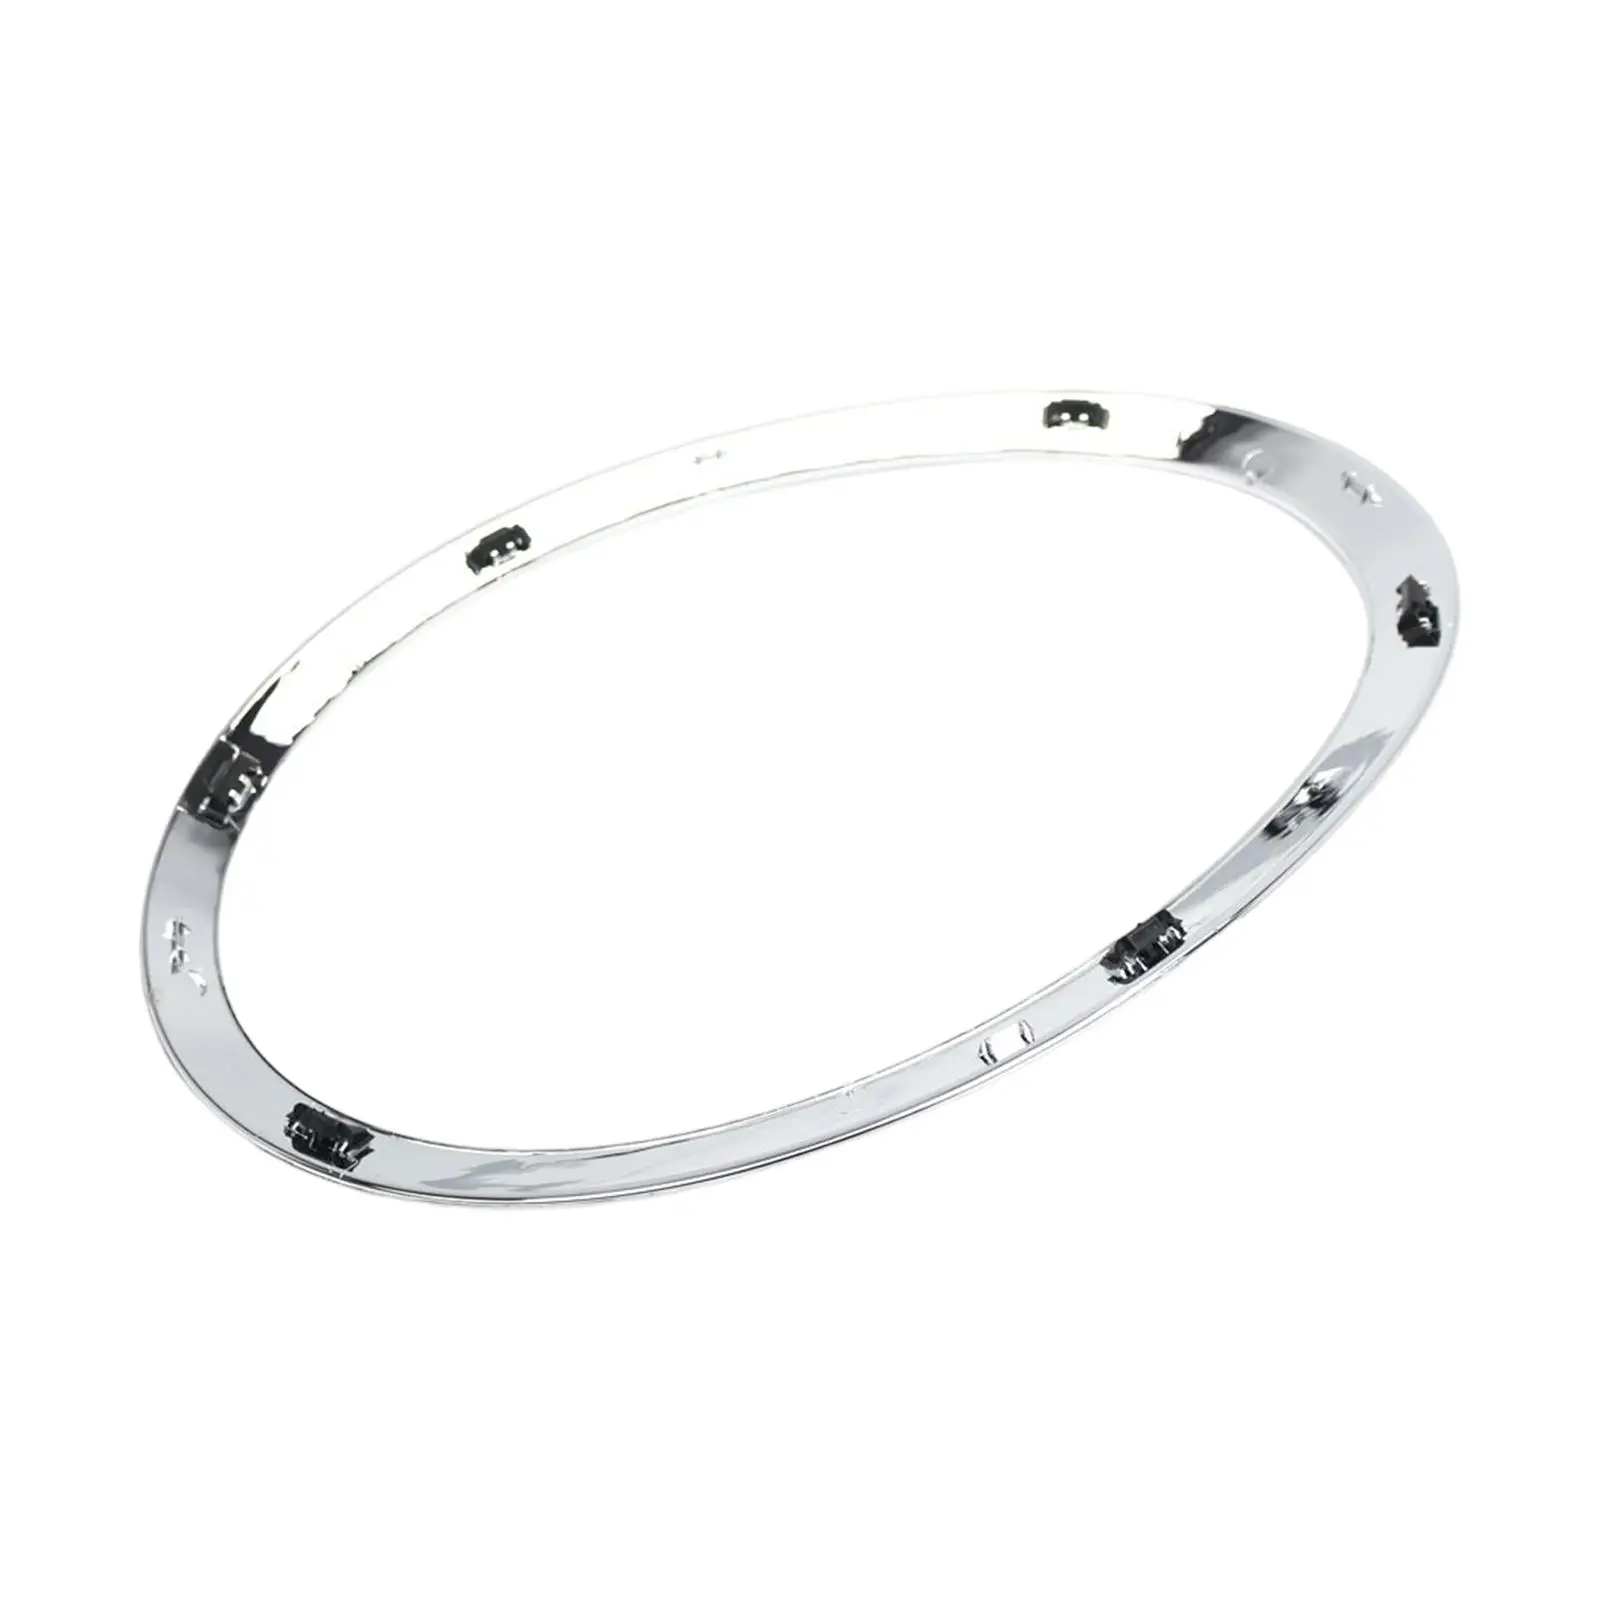 Headlight Bezel Cover Directly Replace Decorate Headlamp Bezel Headlamp Trim Ring Headlight Cover Trim for F56 Mini